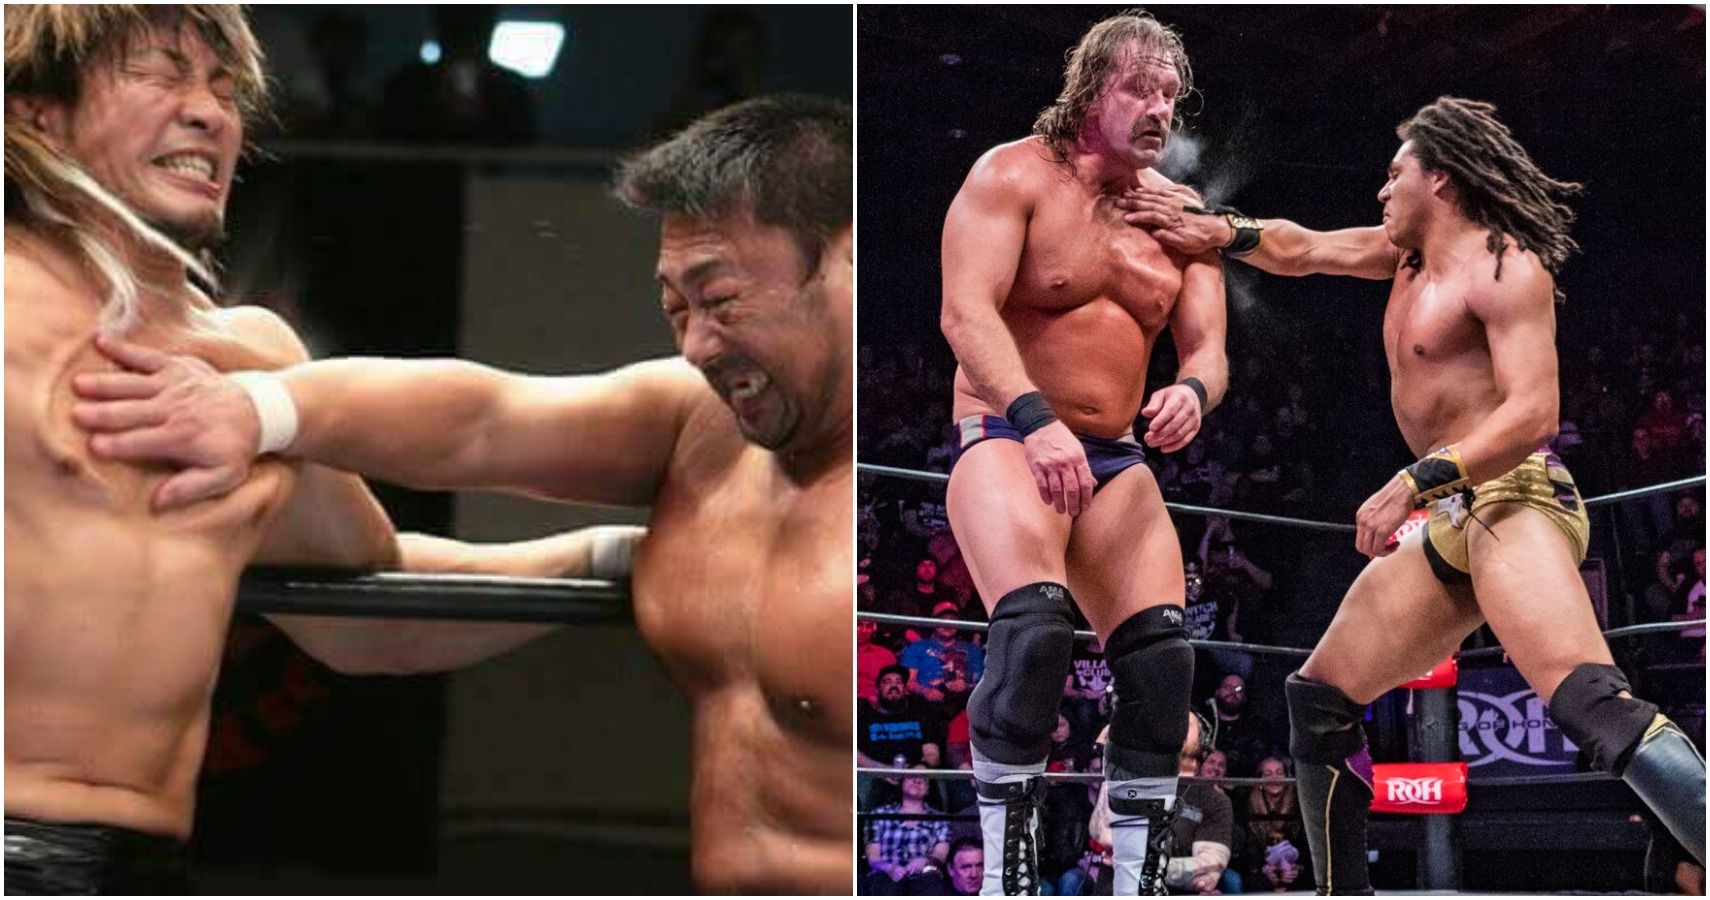 Split Screen Image Of Strong Chops In Wrestling Matches In Japan And ROH